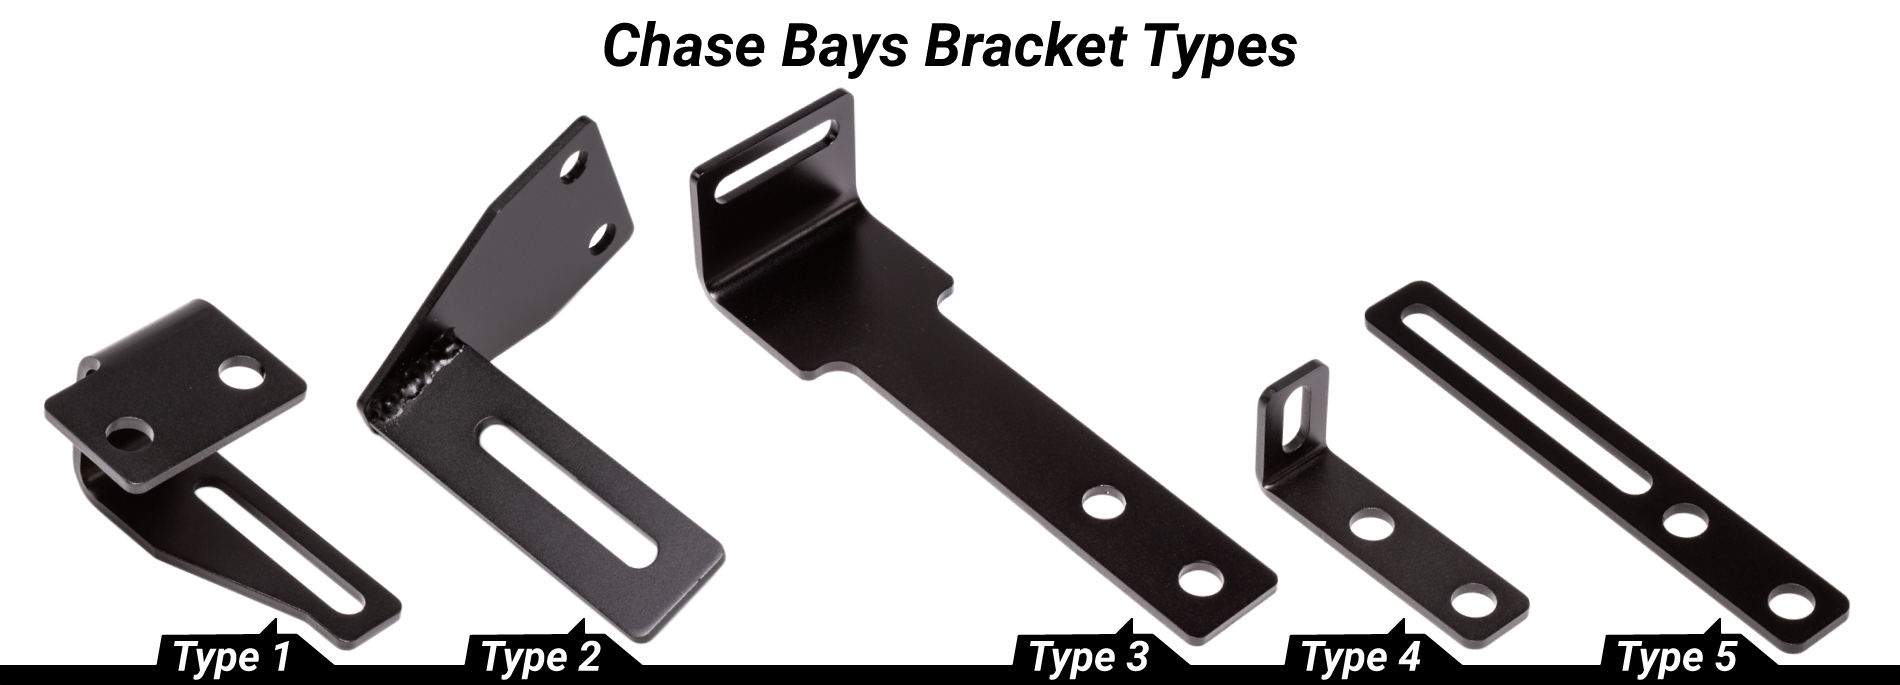 https://cdn.shopify.com/s/files/1/1923/0325/files/Chase_Bays_Coolant_Overflow_Brackets.png?v=1566921925